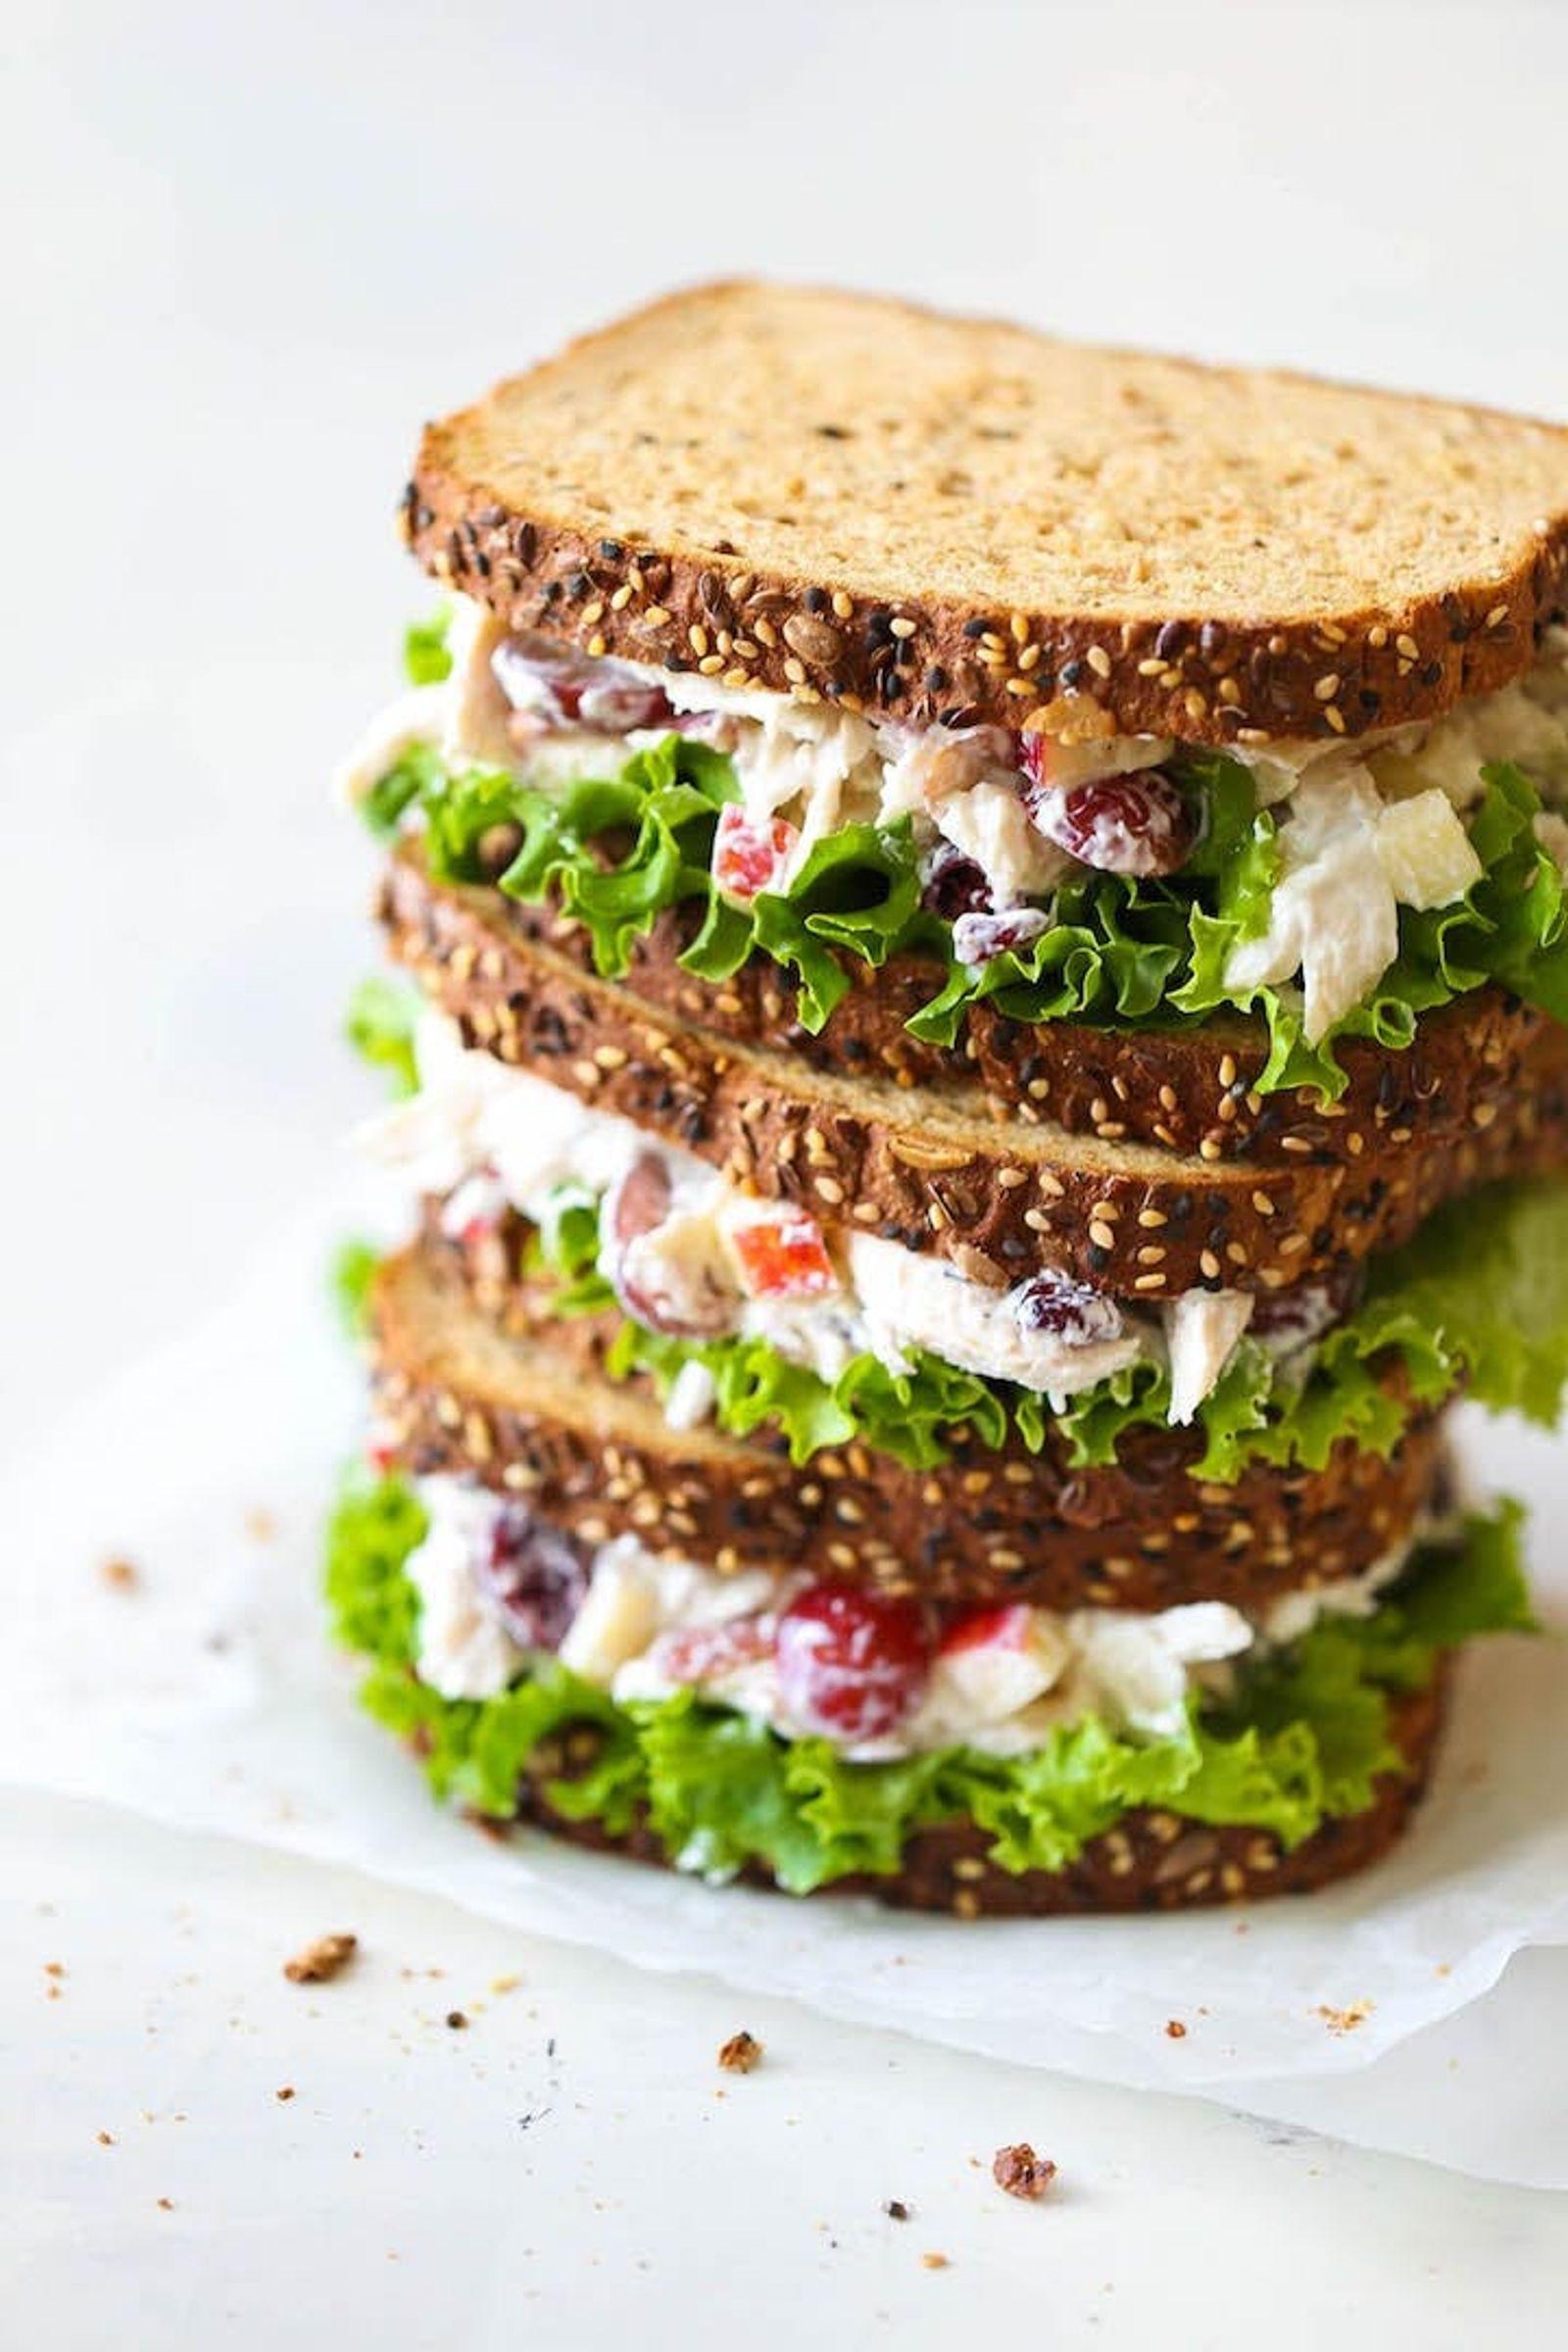 Juicy grapes, tart apples, and cranberries is comfort food between two slices. (via <strong><a href="http://damndelicious.net/2012/11/07/lightened-up-greek-yogurt-chicken-salad-sandwich/">Damn Delicious</a></strong>)